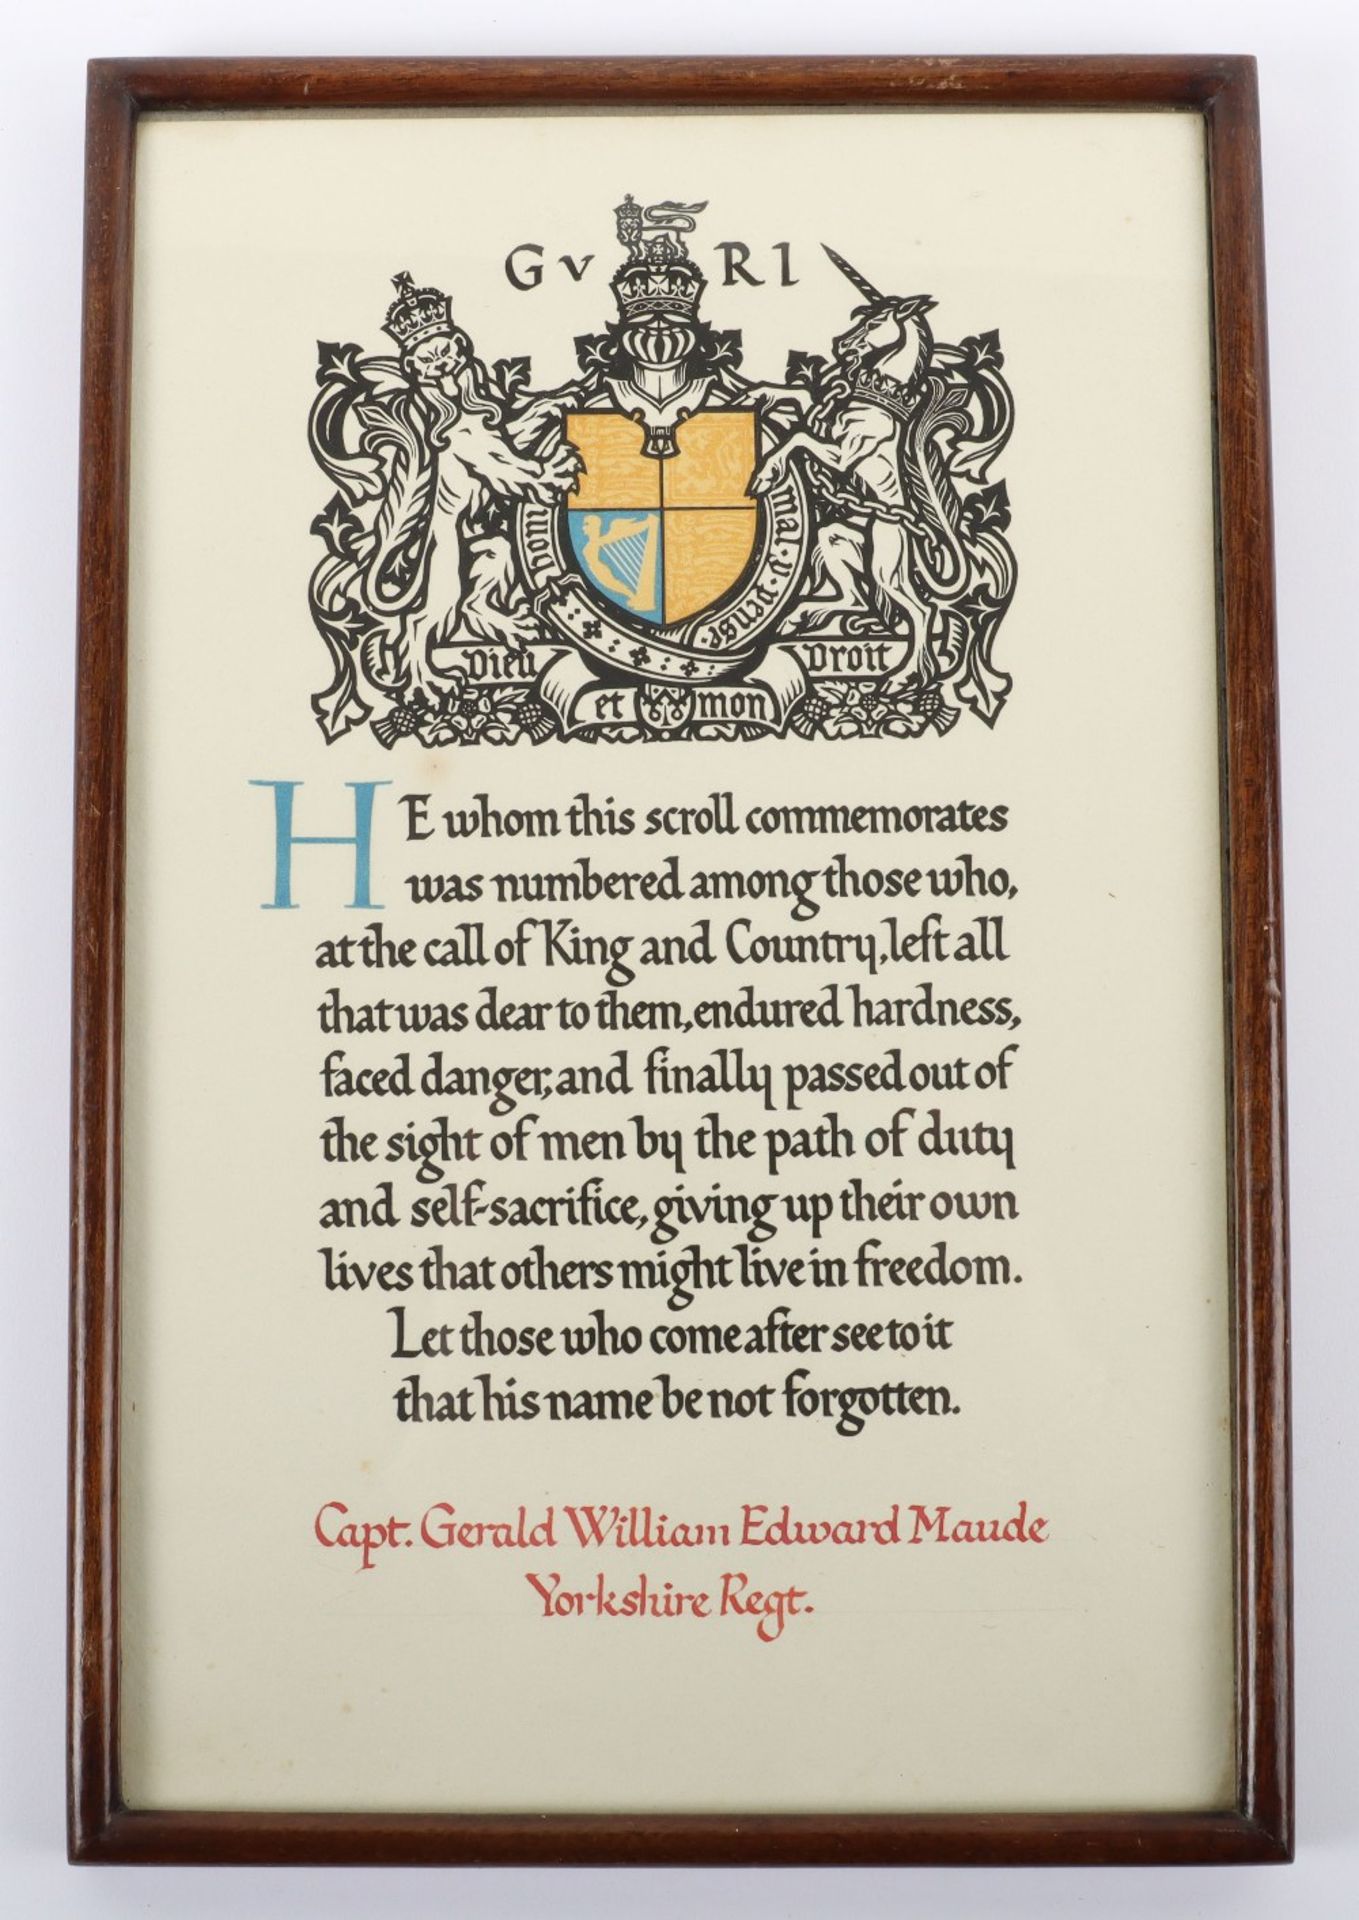 Memorial Scroll to Captain Gerald William Edward Maude Yorkshire Regiment Wounded in action at Dakk